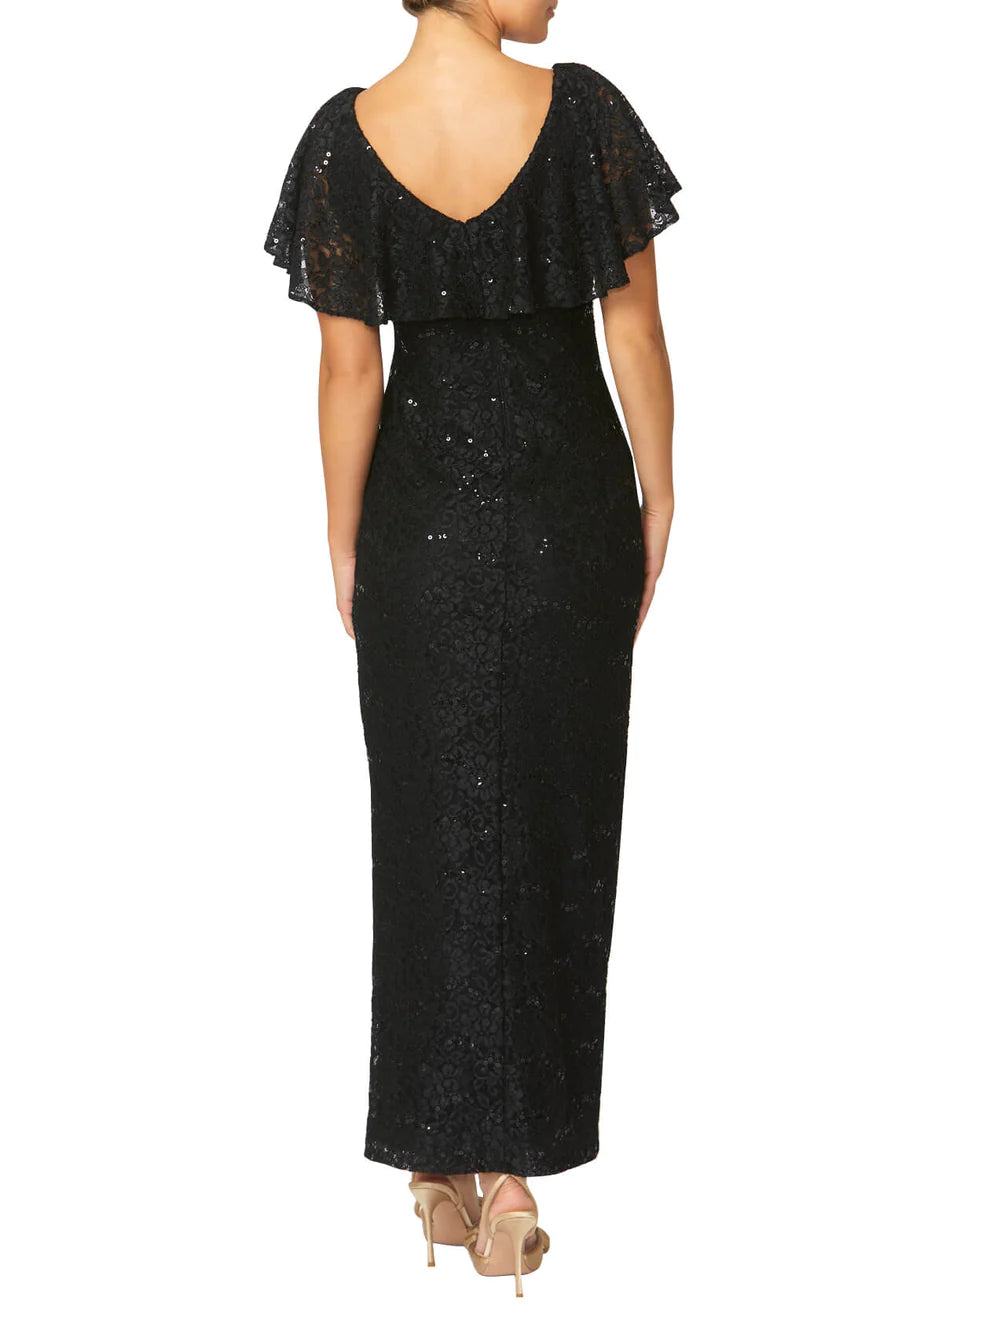 Anthea Crawford Trudy Sequin Lace Gown - Black